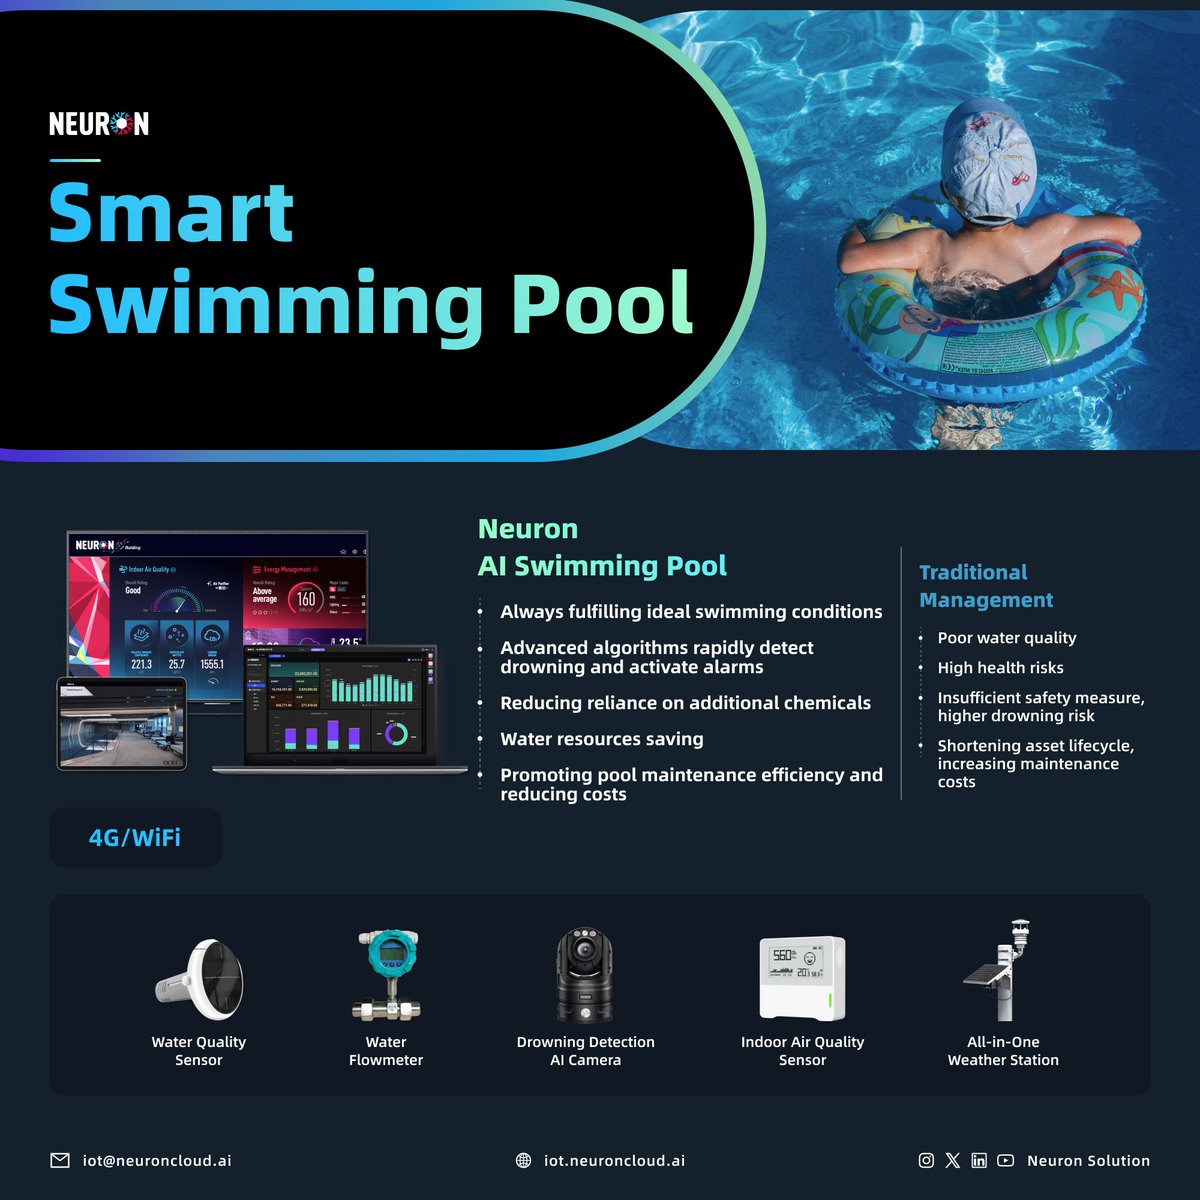 Swimming in the contaminated water causes many diseases. Drowning is the third leading cause of accidental deaths globally. A study shows that 12% of water venues fail health checks, so the strict pool maintenance is needed. #watersafety #IoT #swimmingpool #drowningprevention